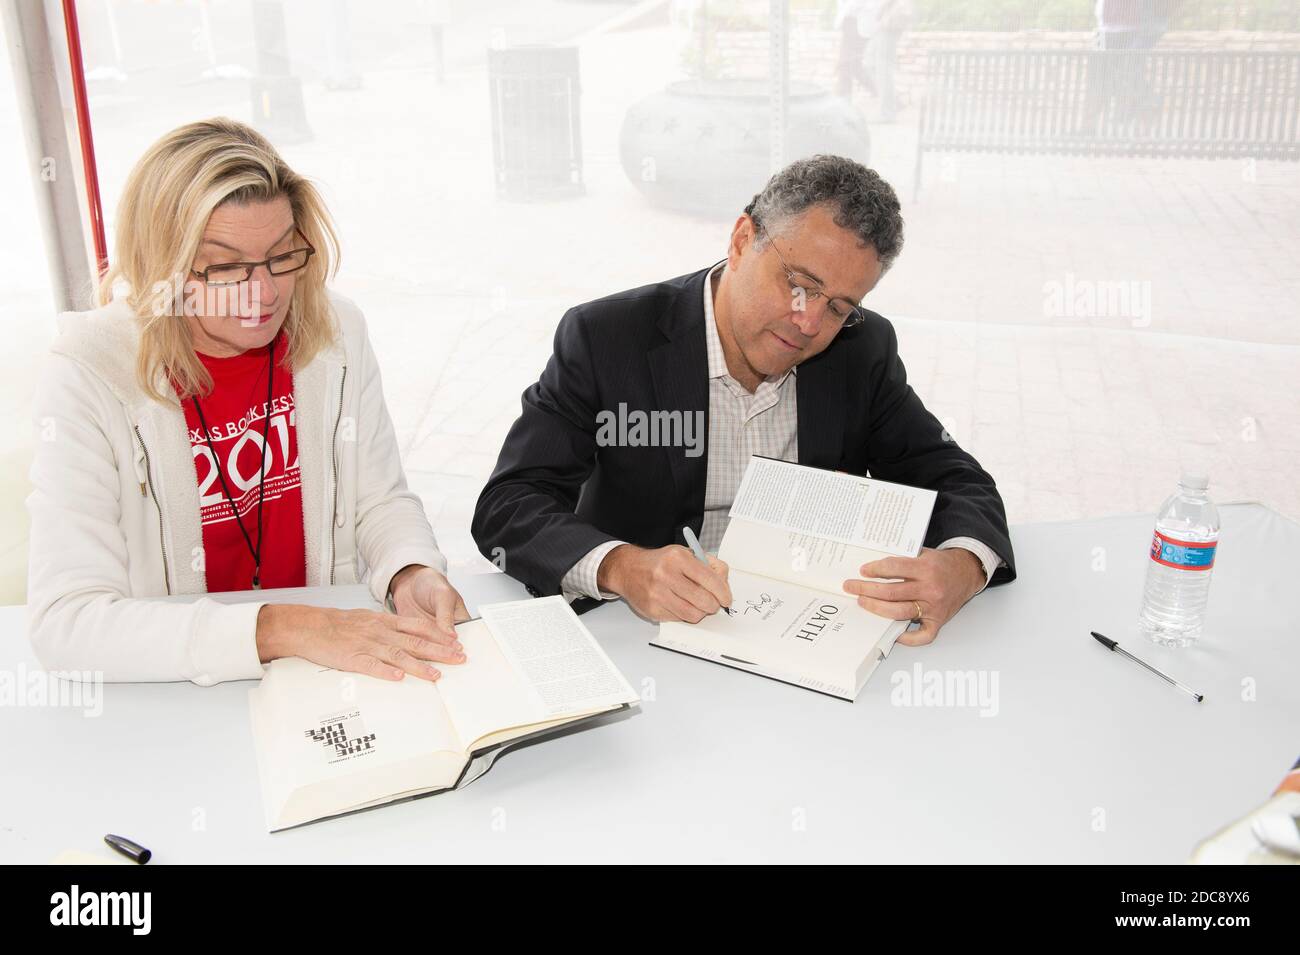 Noted legal analyst, lawyer, blogger and author Jeffrey Toobin signs books after delivering a keynote speech at the Texas Book Festival on October 27, 2012. Toobin's appearance coincided with the publication of one of his many books, 'The Oath' about the Obama White House and the Supreme Court. Stock Photo